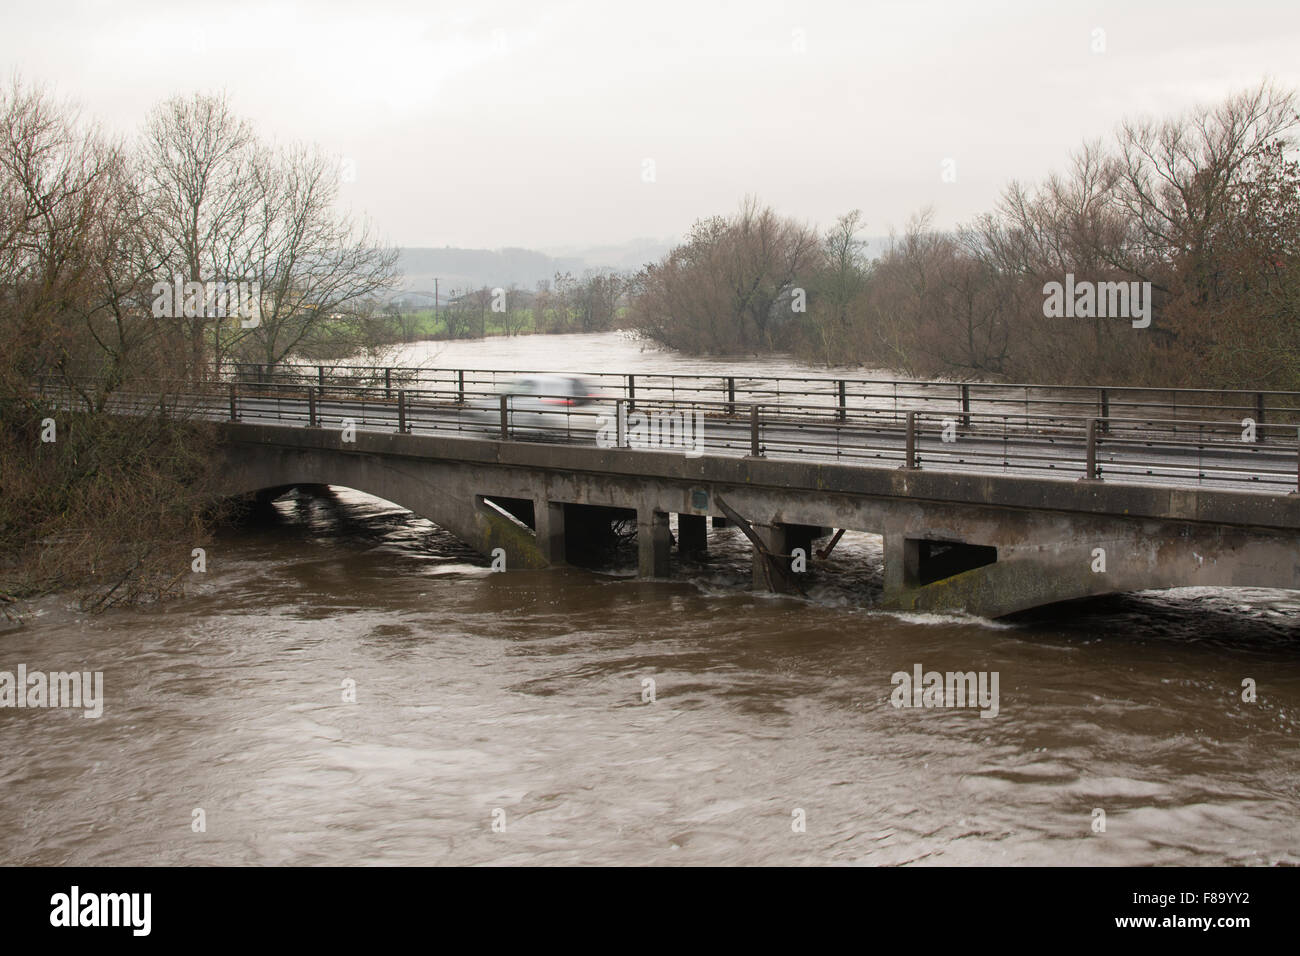 Stirling floods after Storm Desmond 2015 - car on the A84 road crossing the flooded river Forth, Scotland, UK Stock Photo